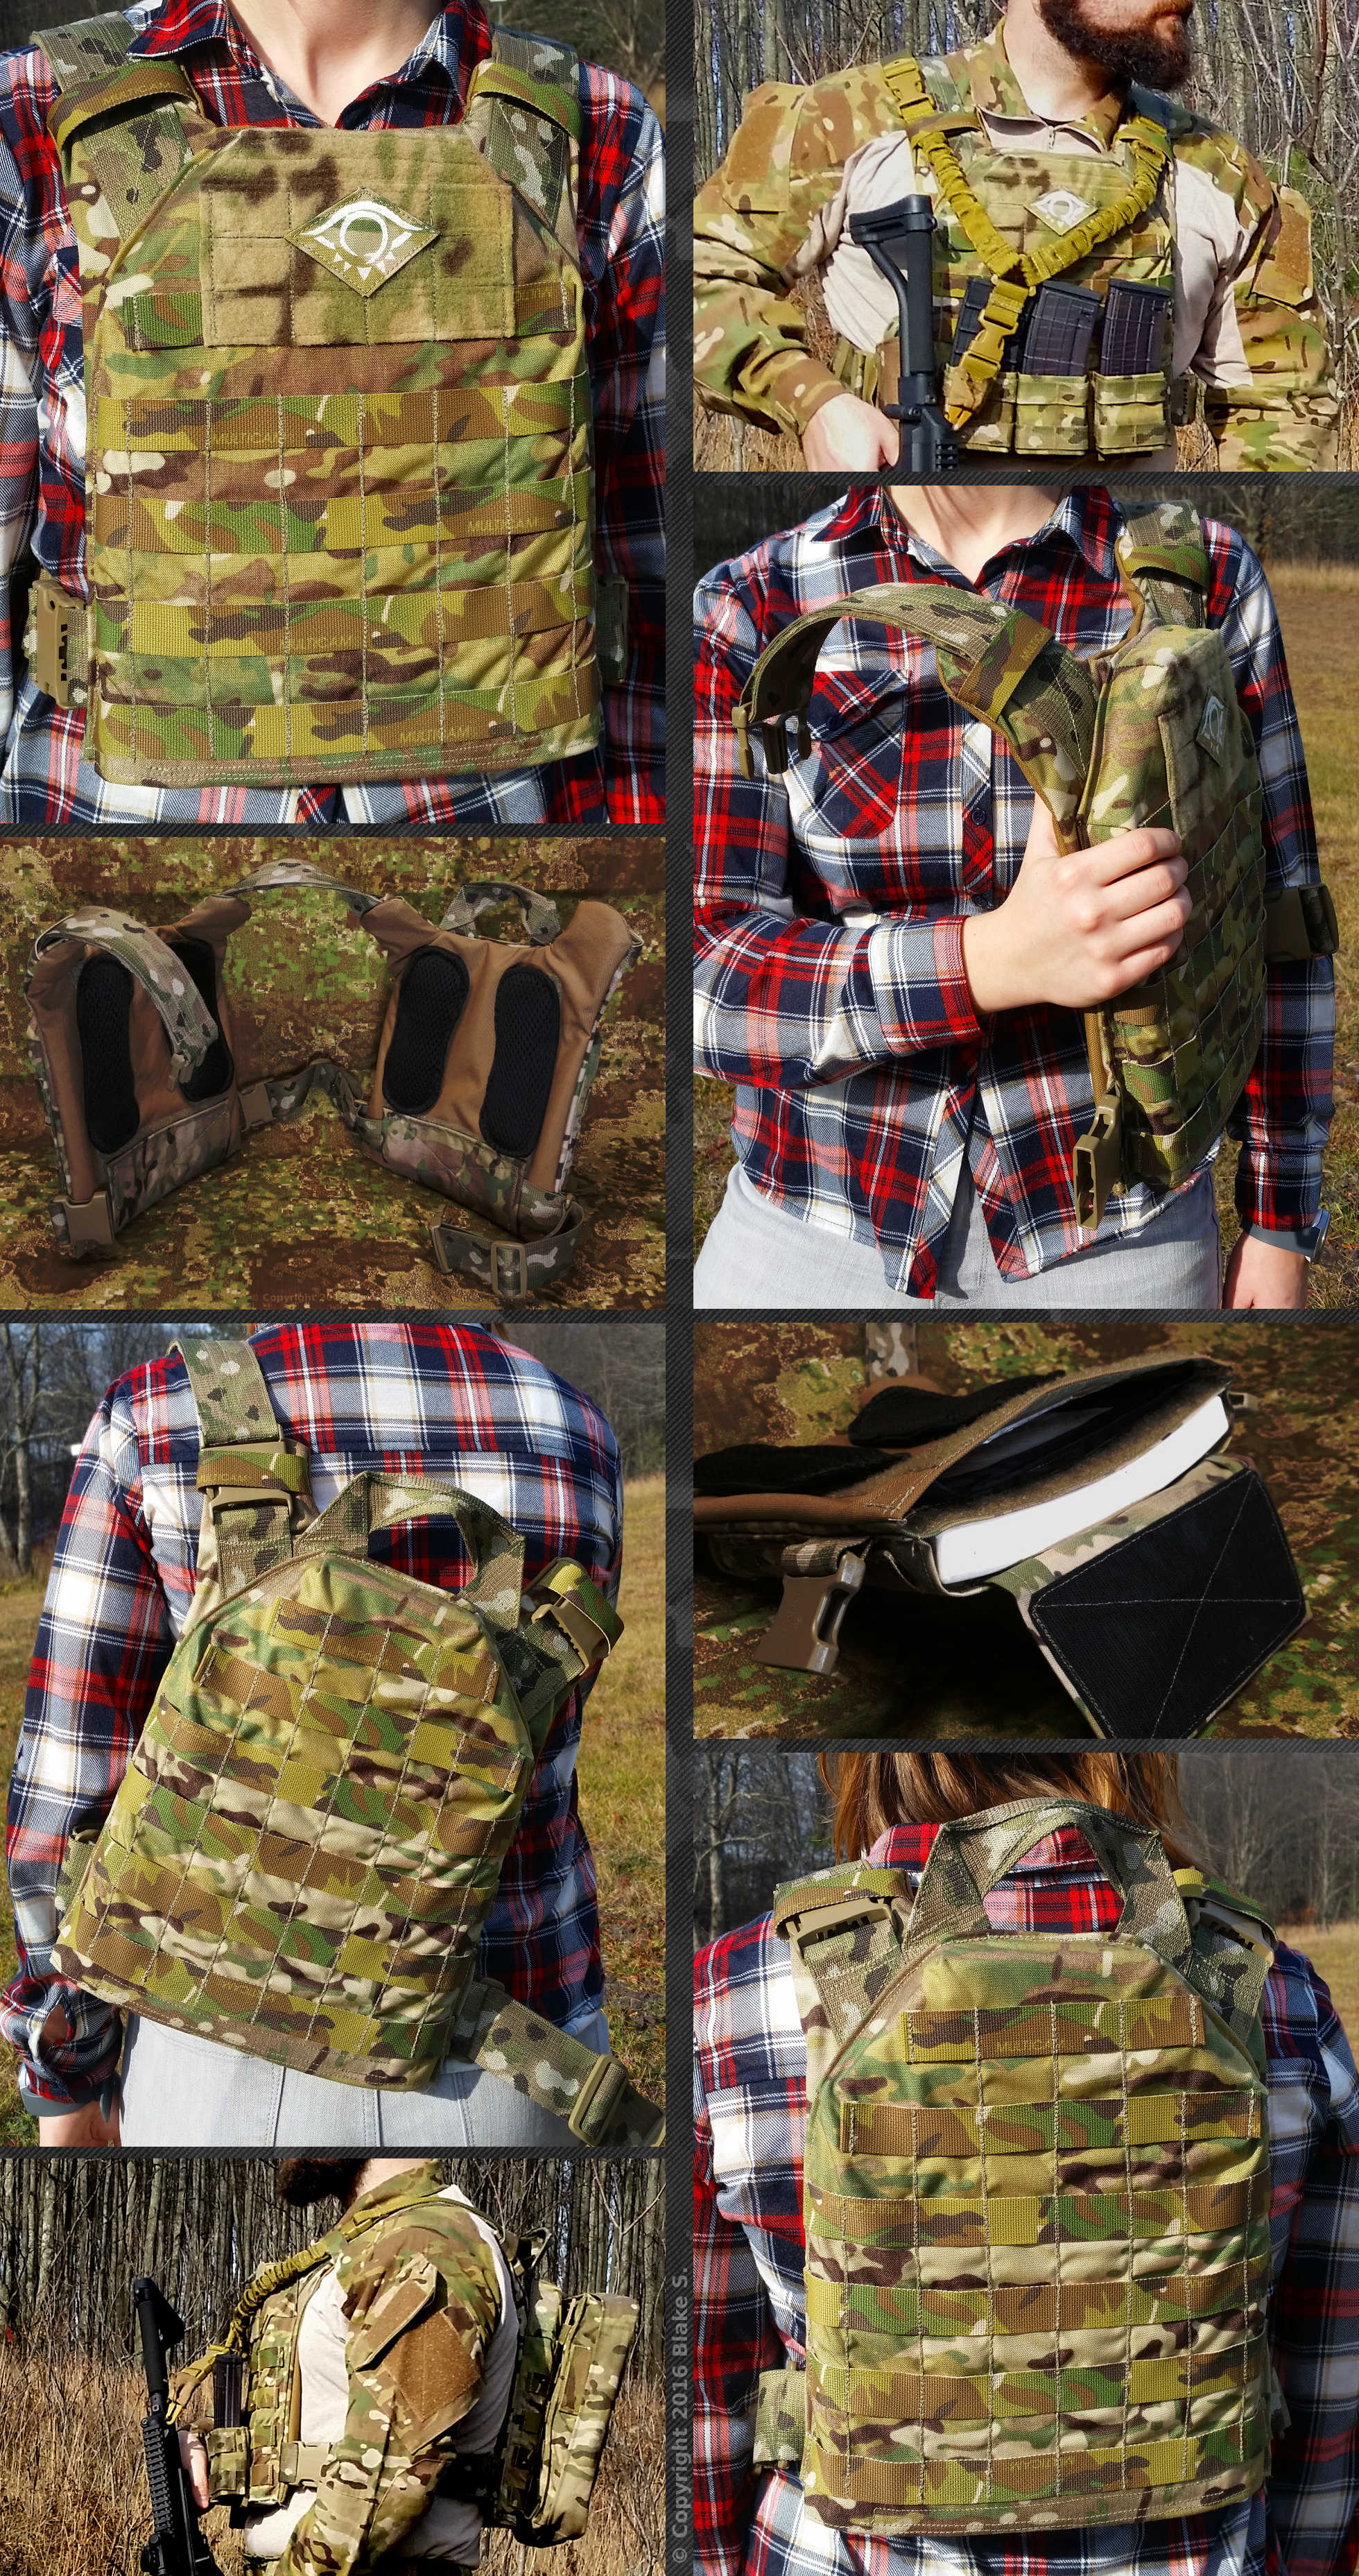 Hard Armor Carrier system designed and prototyped by Omnitac. Prototype shown in Crye Precision Multicam.